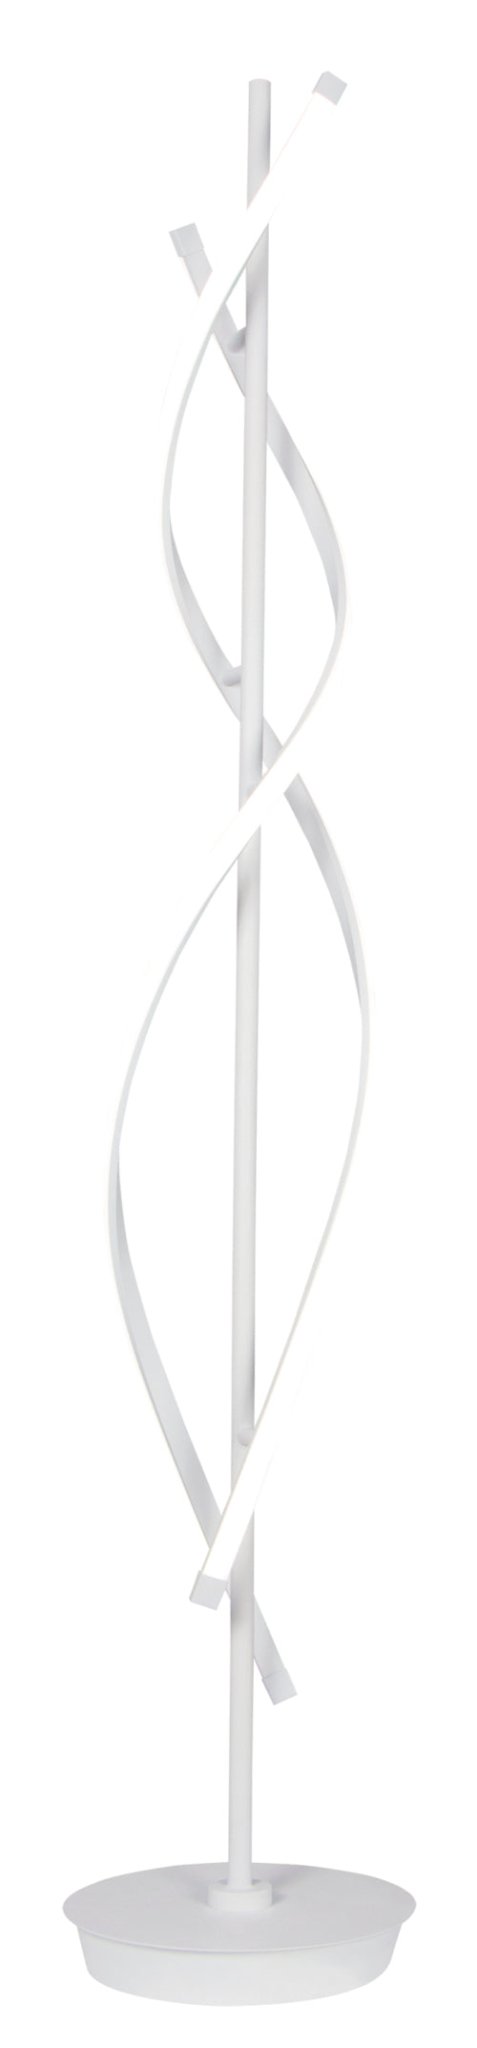 Matt White Aluminium and Acrylic LED Floor Lamp with Remote Control -40W LED (Included) - Lifespace